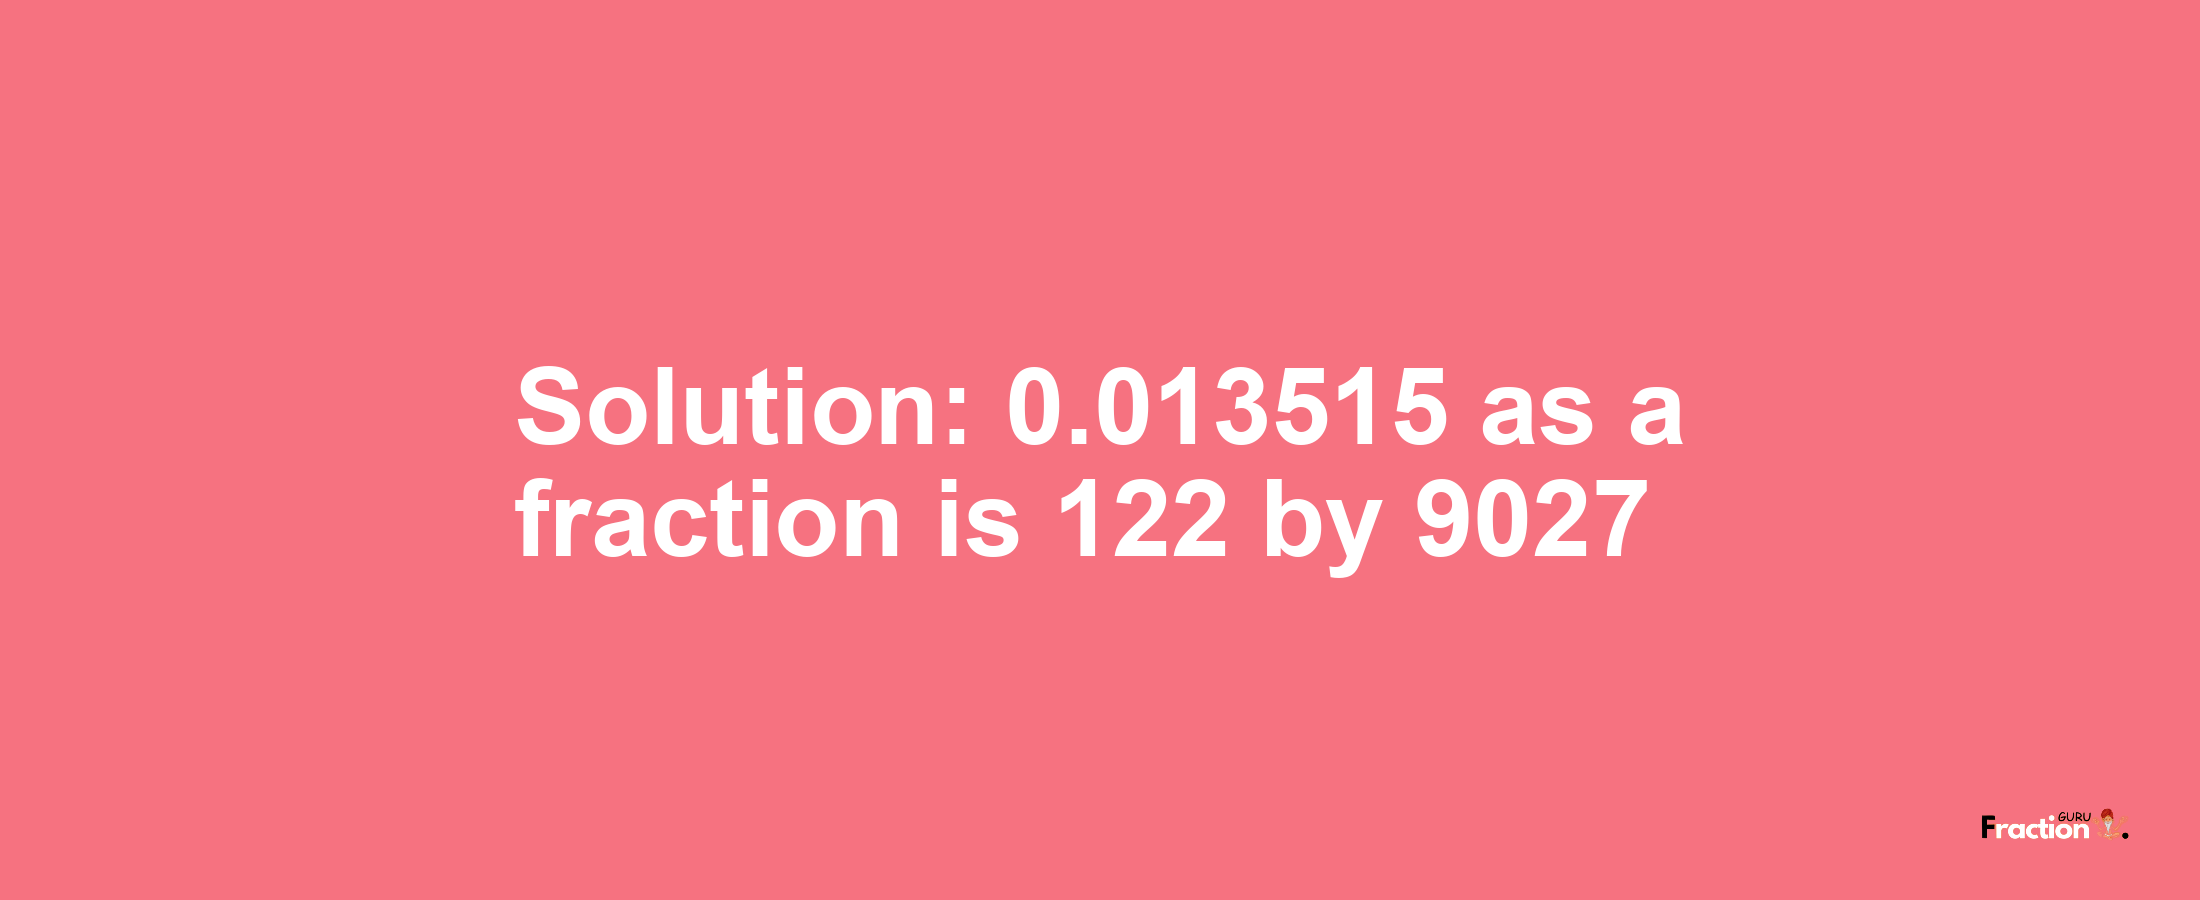 Solution:0.013515 as a fraction is 122/9027